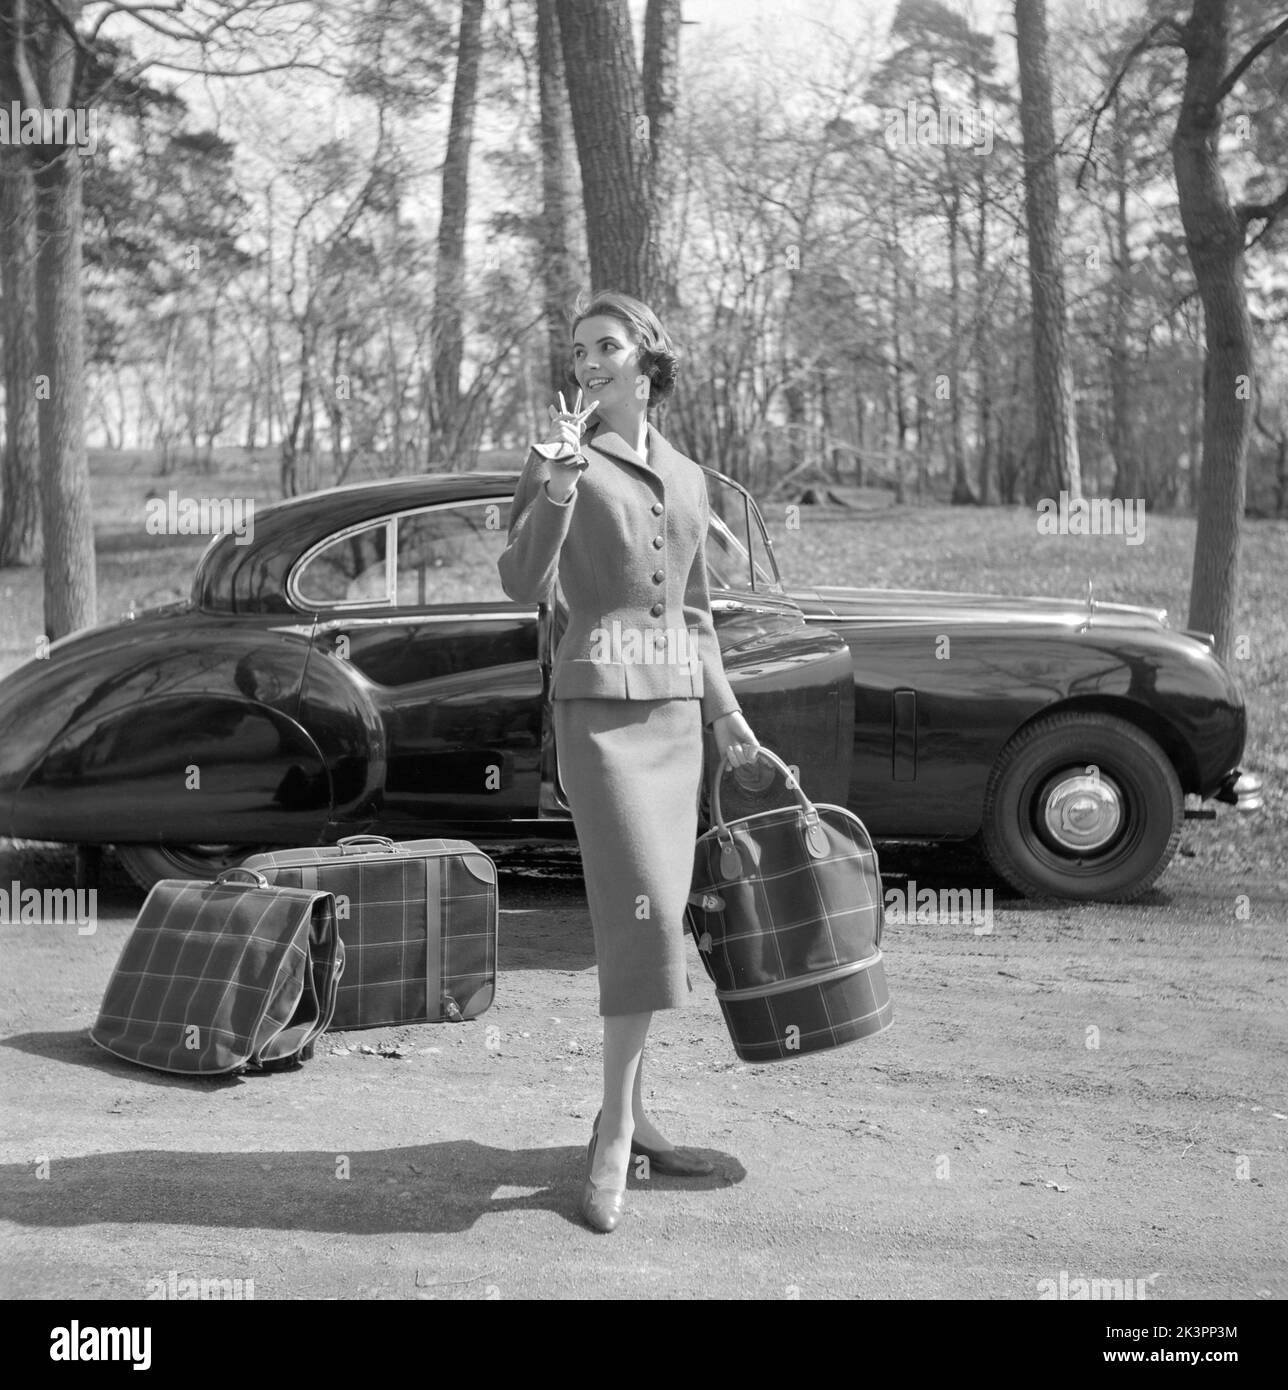 In the 1950s. A young woman in a matching outfit of jacket and skirt, typically 1950s. She stands in front of a beautifully curvy car with three bags and luggage in matching pattern. Sweden 1956 Stock Photo